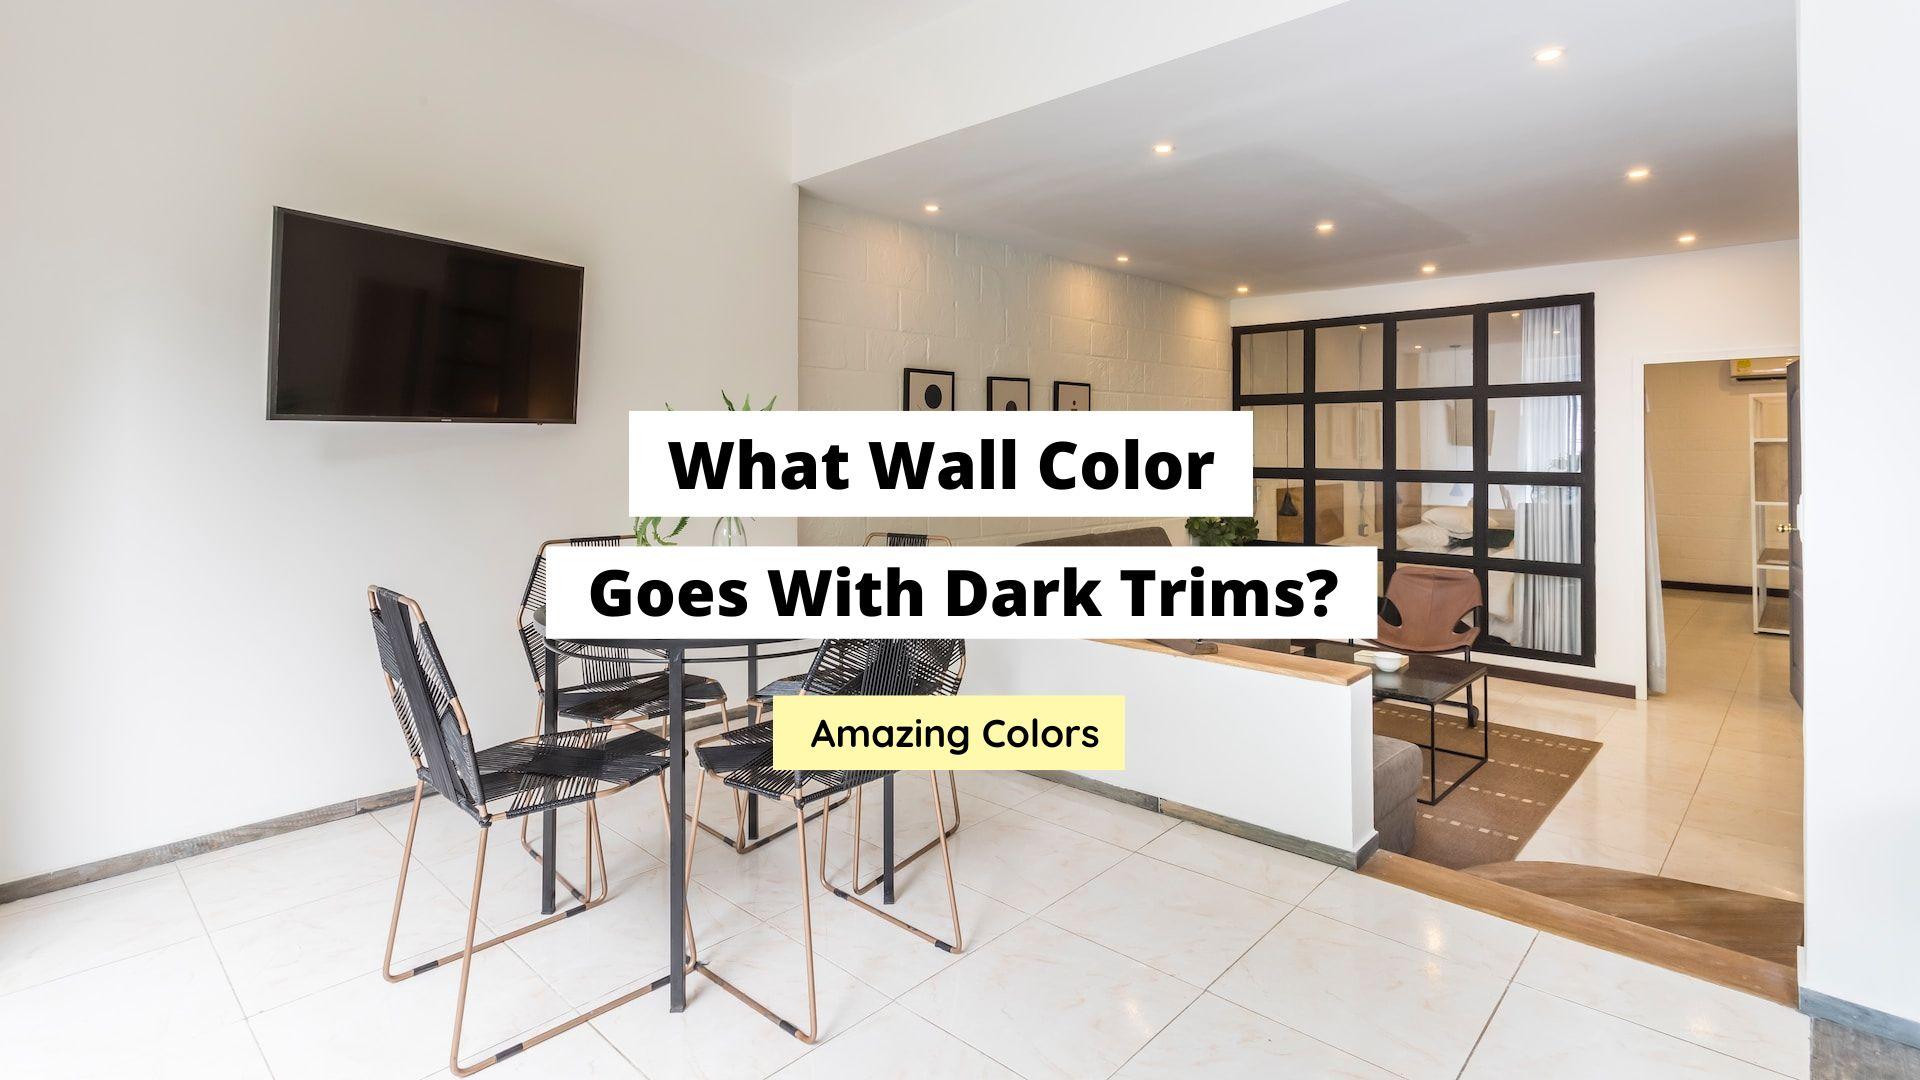 What Wall Color Goes With Dark Trims